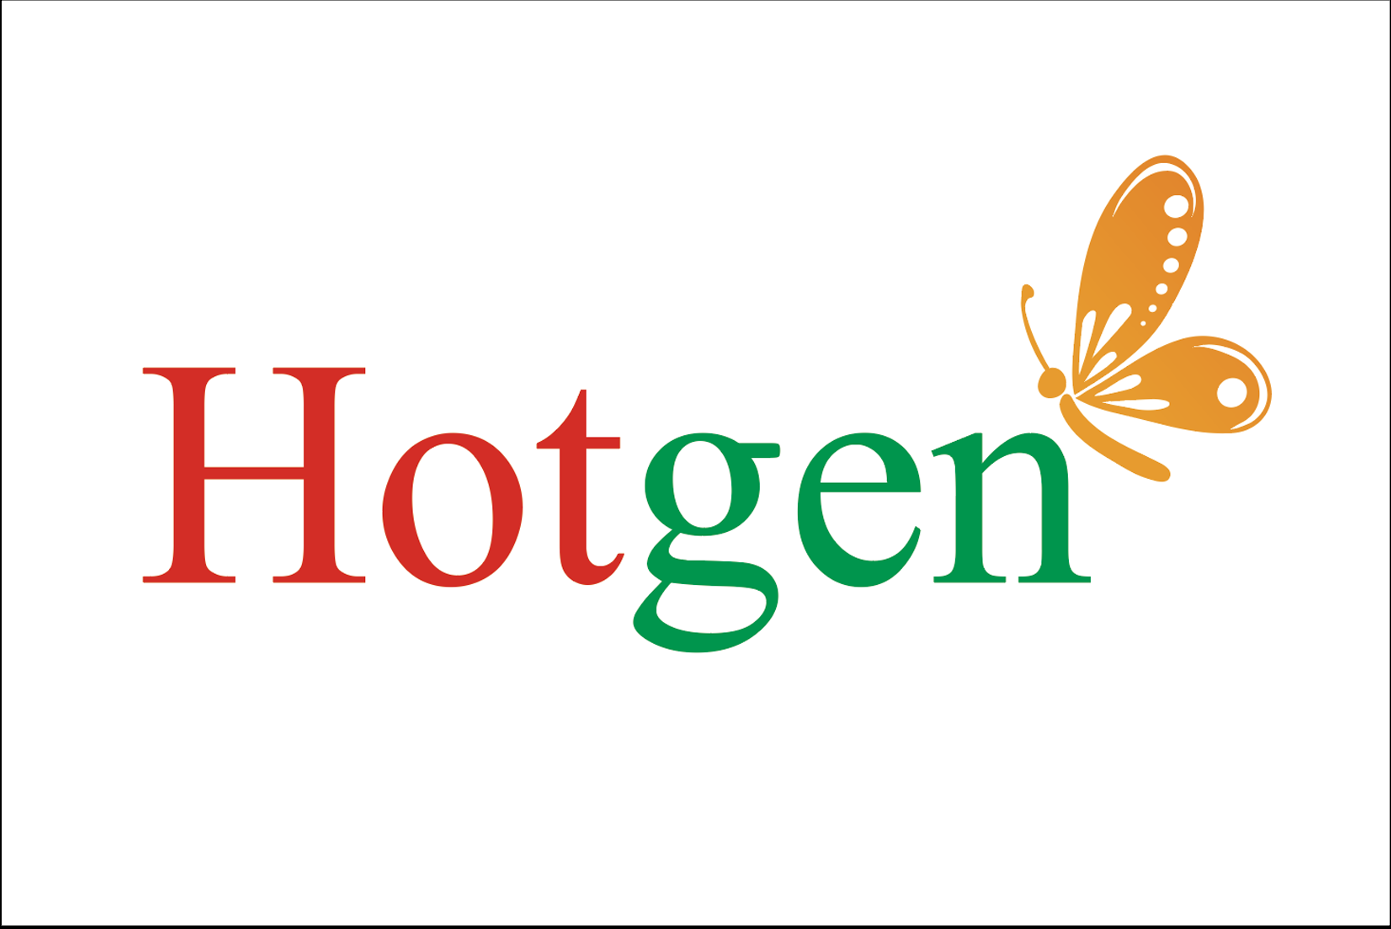 Beijing Hotgen Biotech Co., Ltd proposes to invest in a fund related to the medical and health field